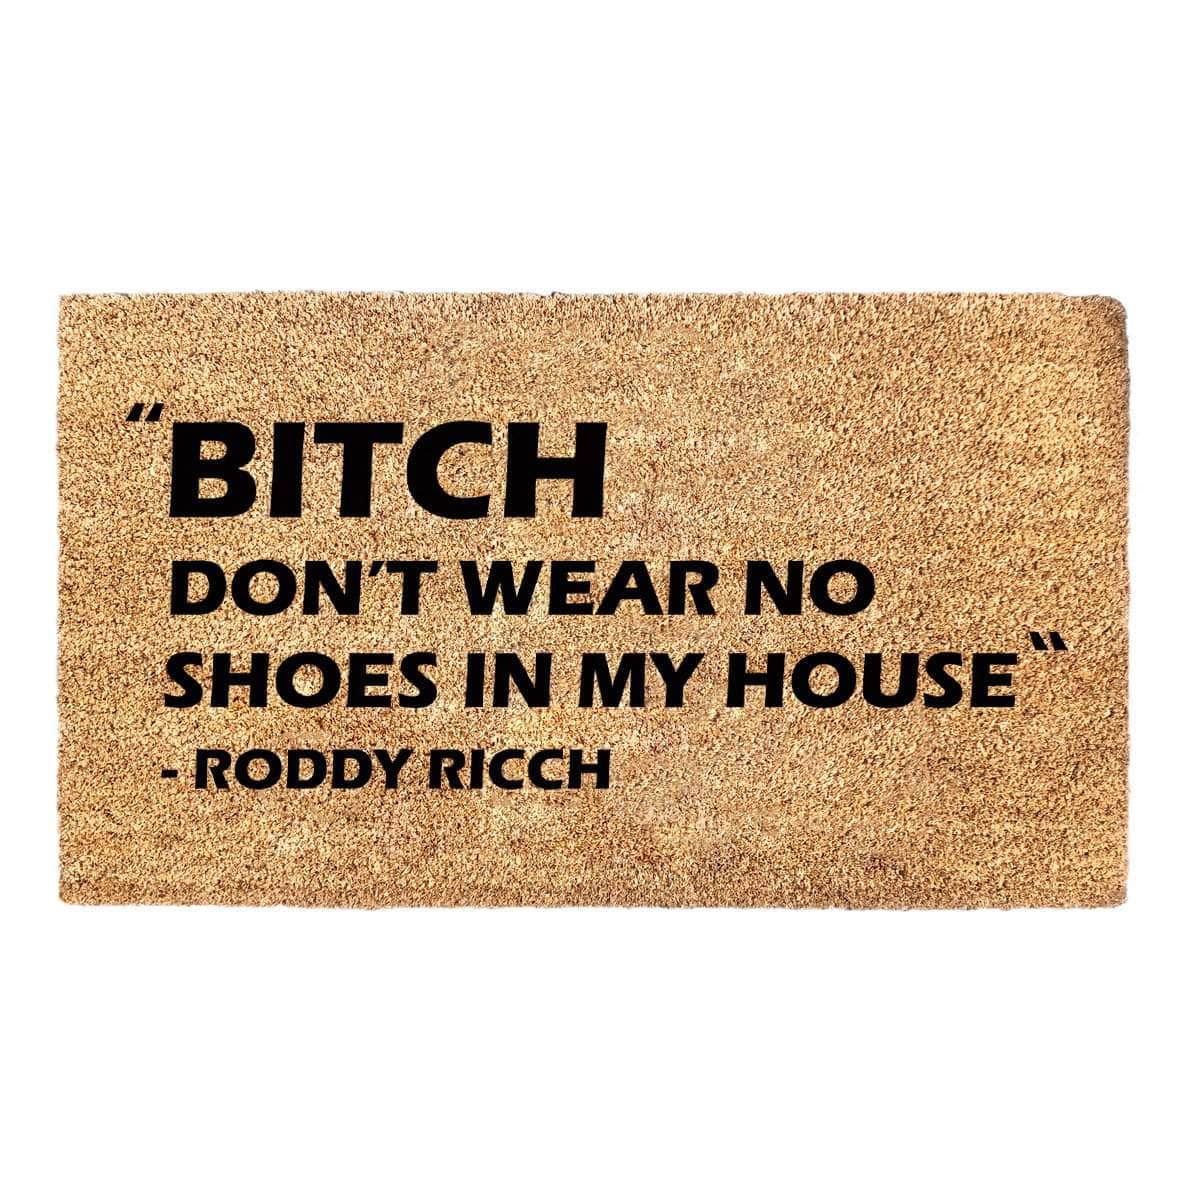 Bold Bitch Don't Wear No Shoes In My House - Roddy Ricch Doormat